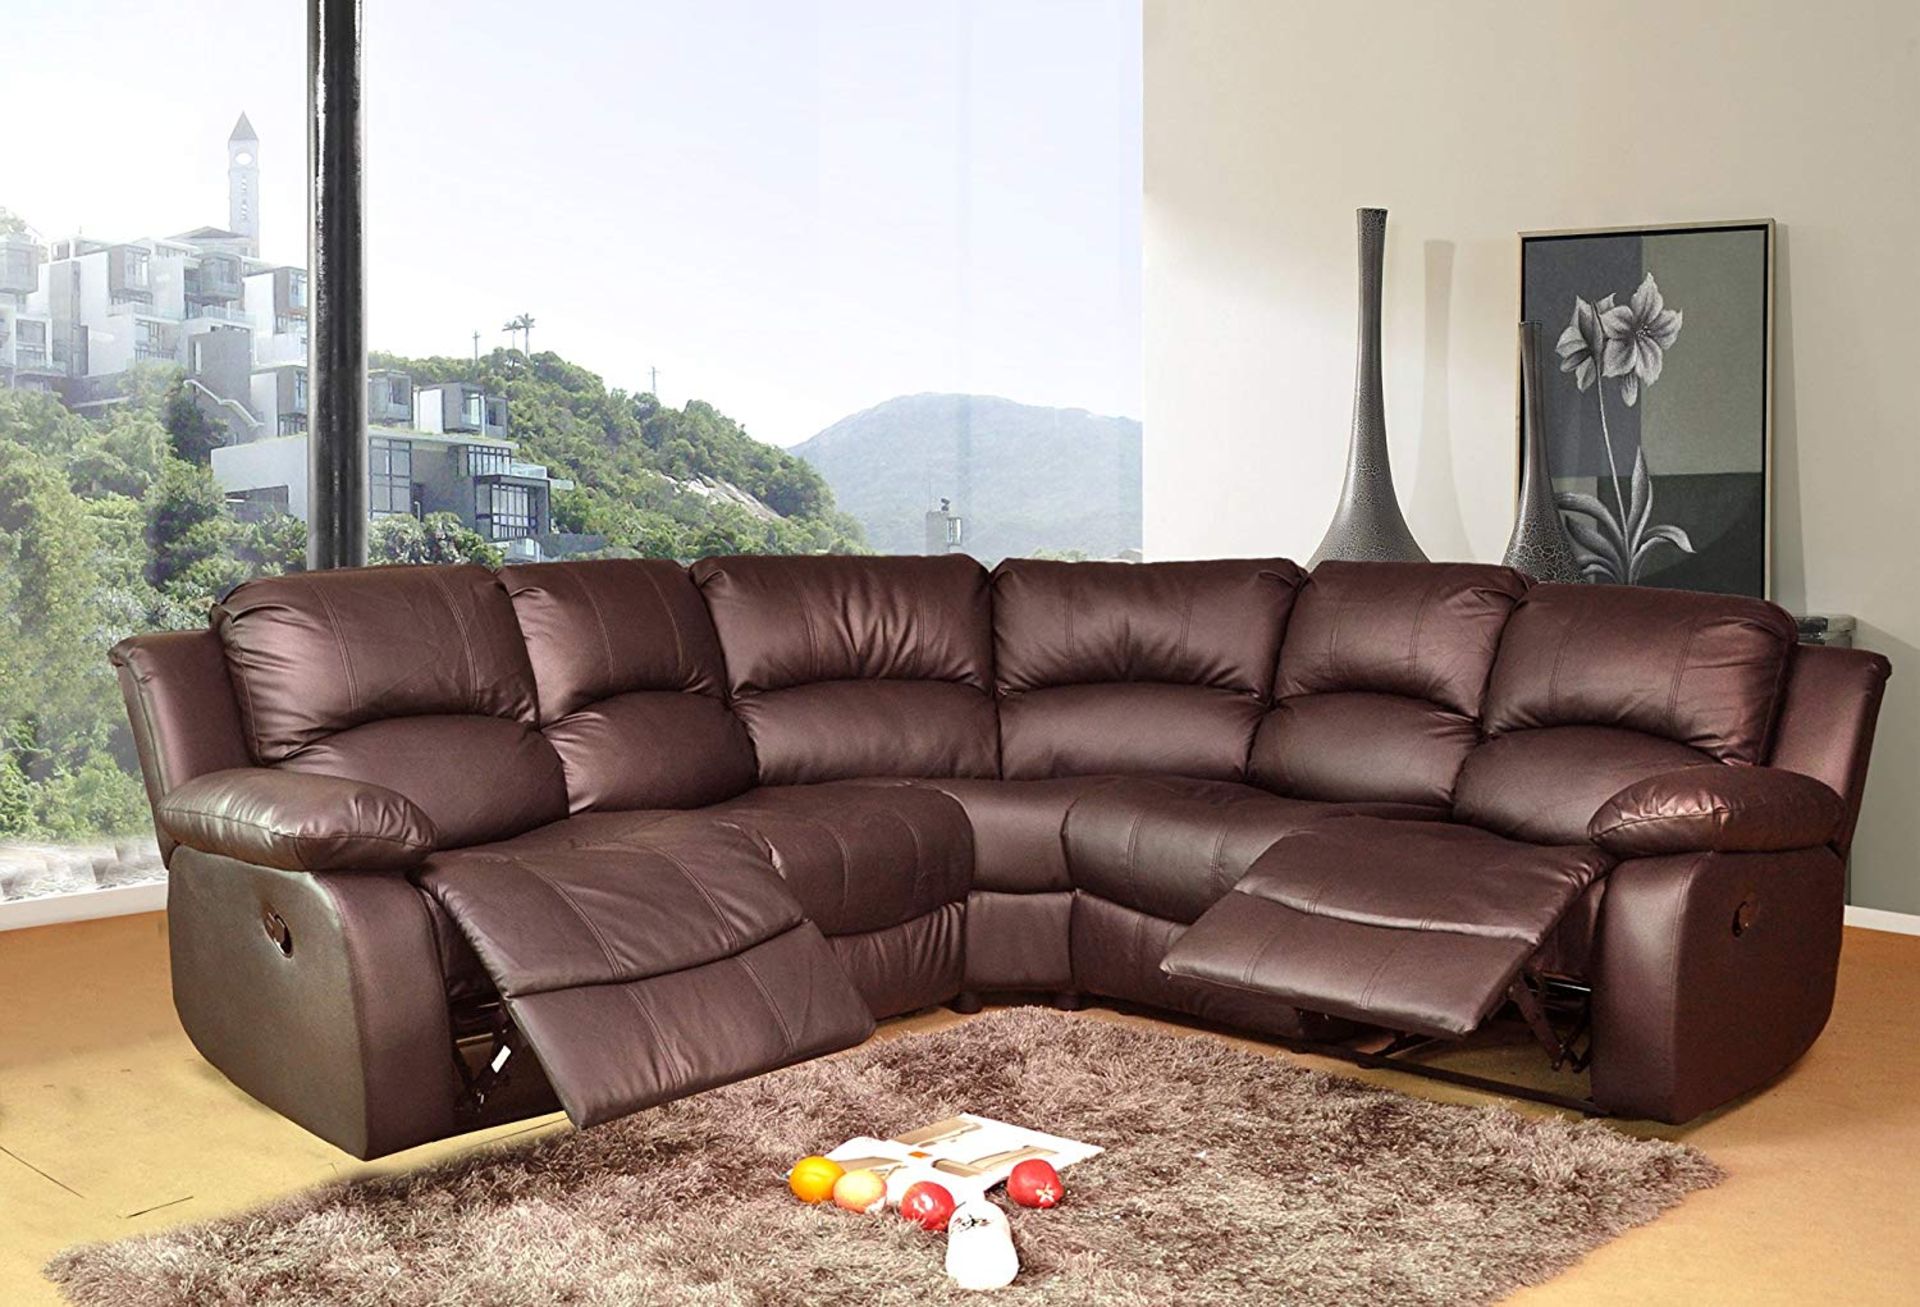 Brand New Boxed Supreme Leather Reclining Corner Sofa In Brown